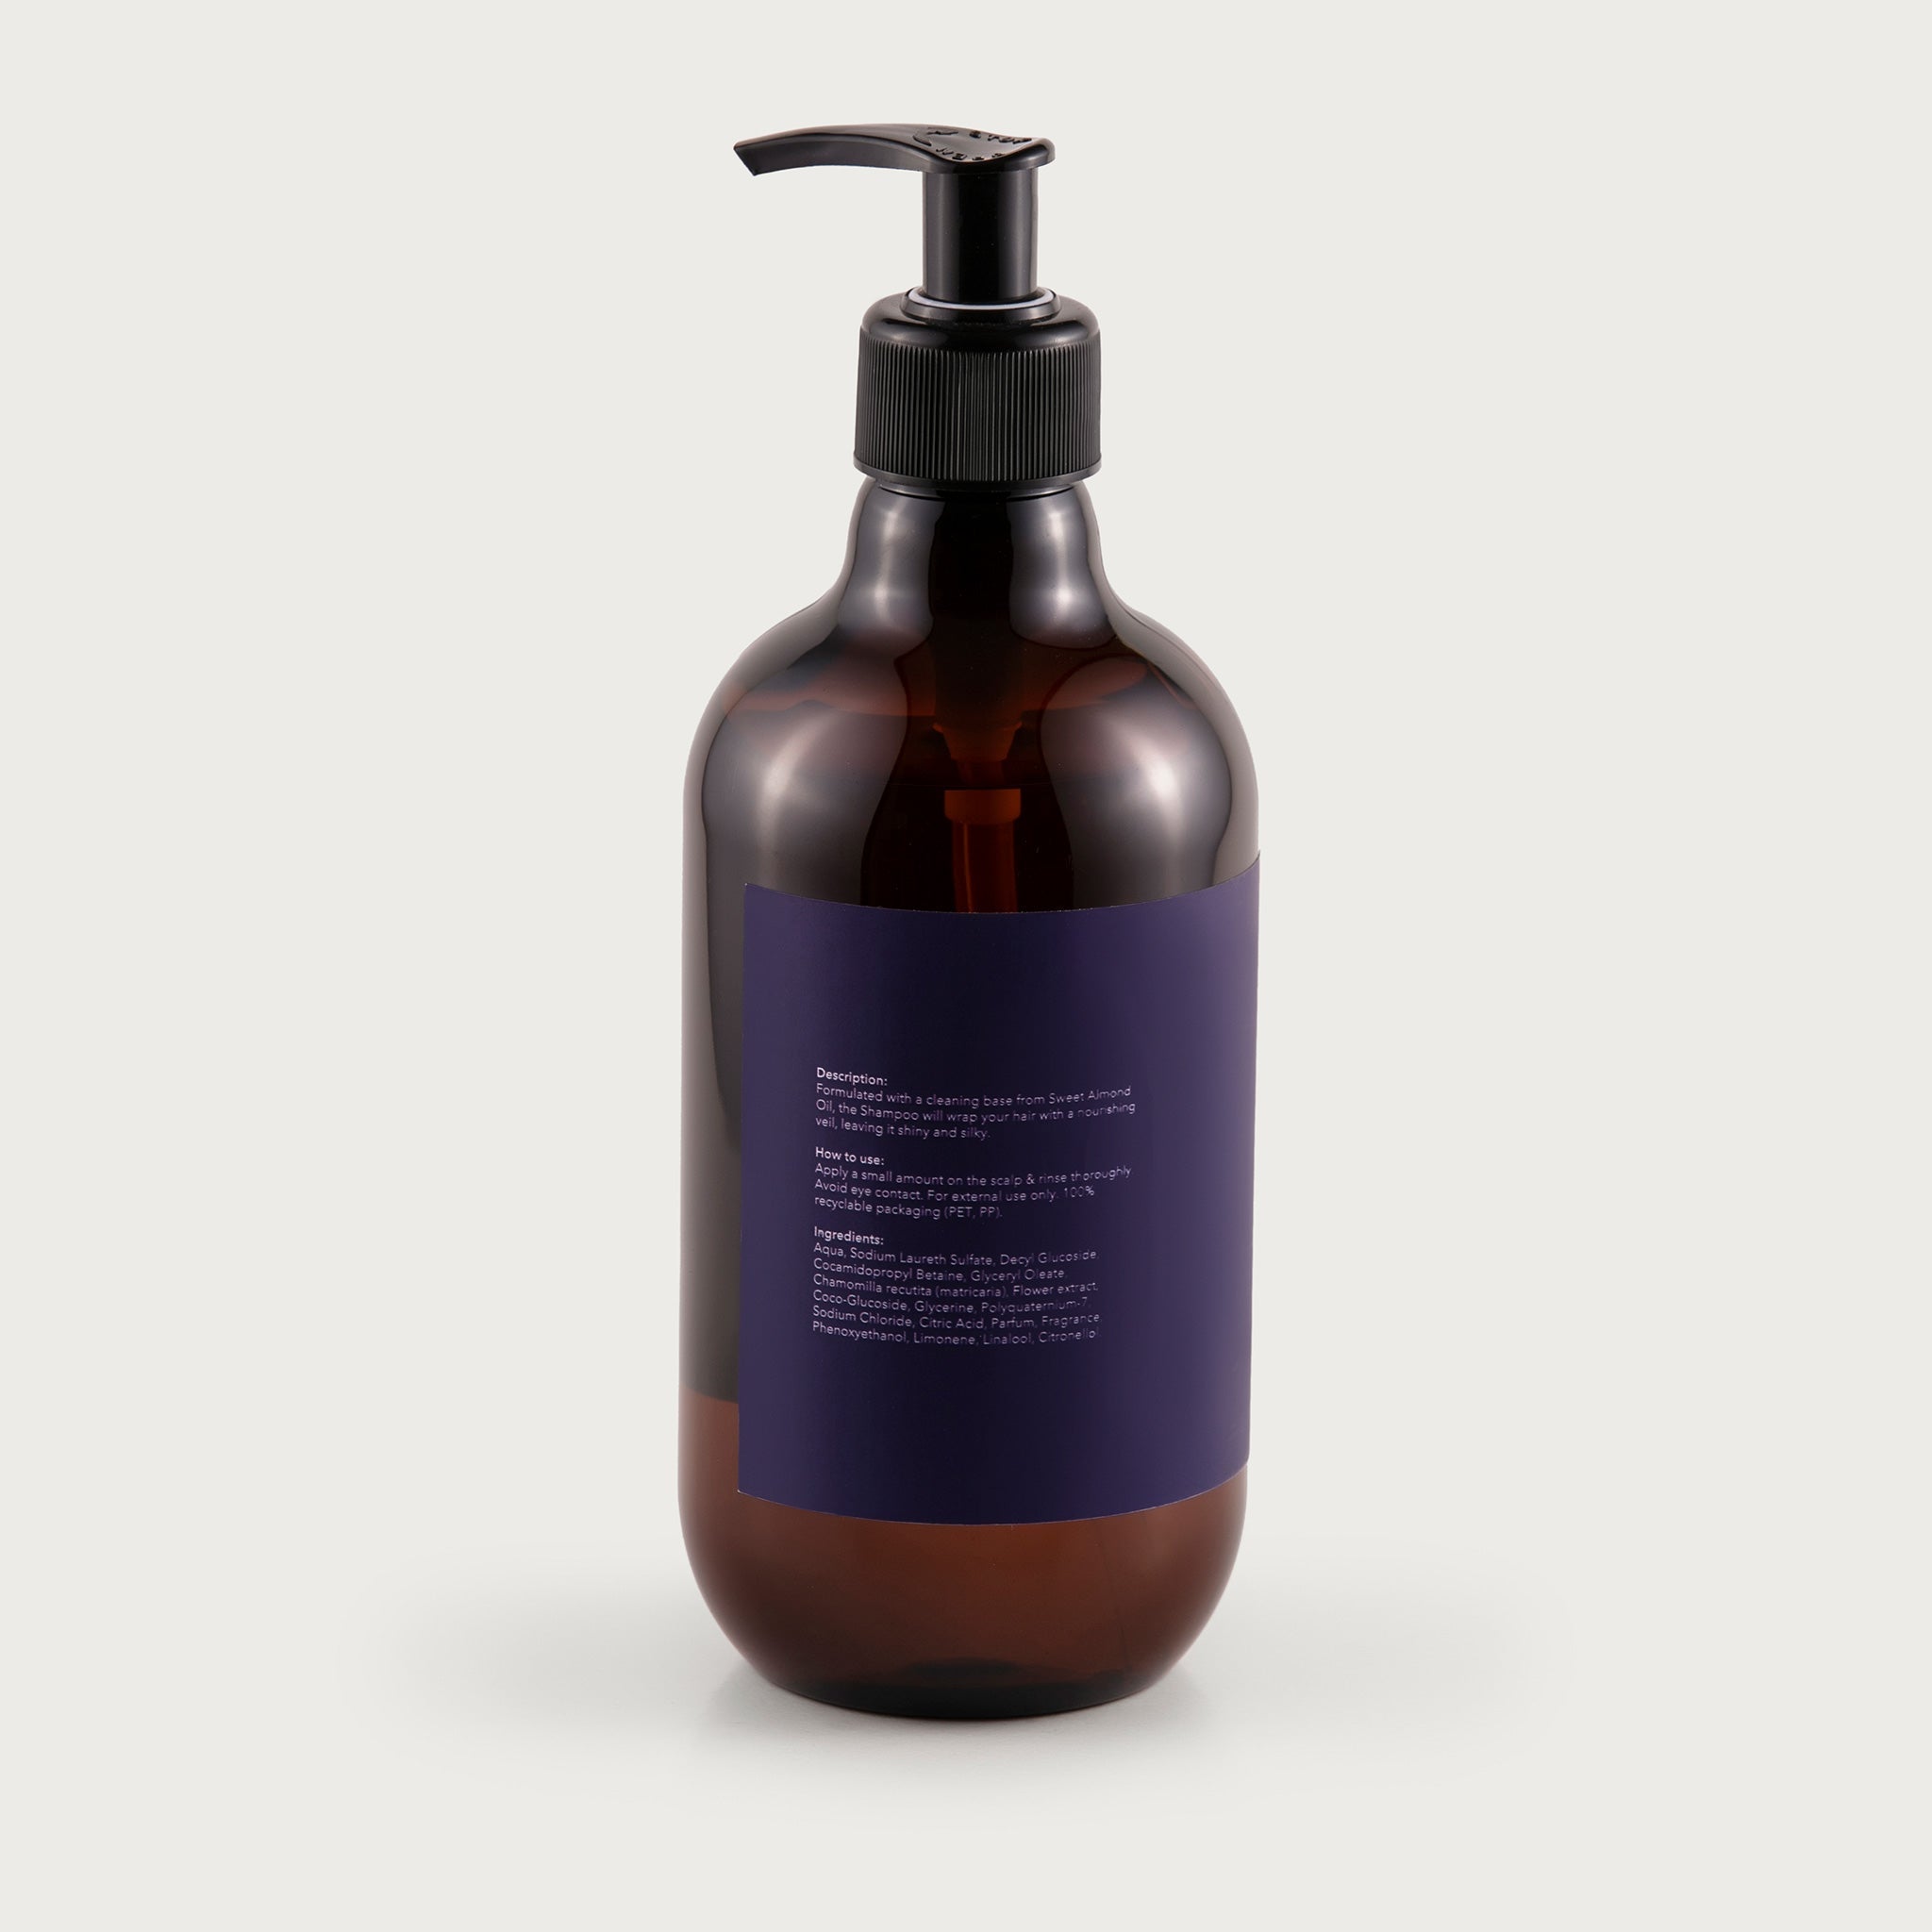 This pump top bottle is amber in color and you can see the liquid soap inside. The label is simple and clean, deep purple in color with the Salma logo and sweet almond scent notated.